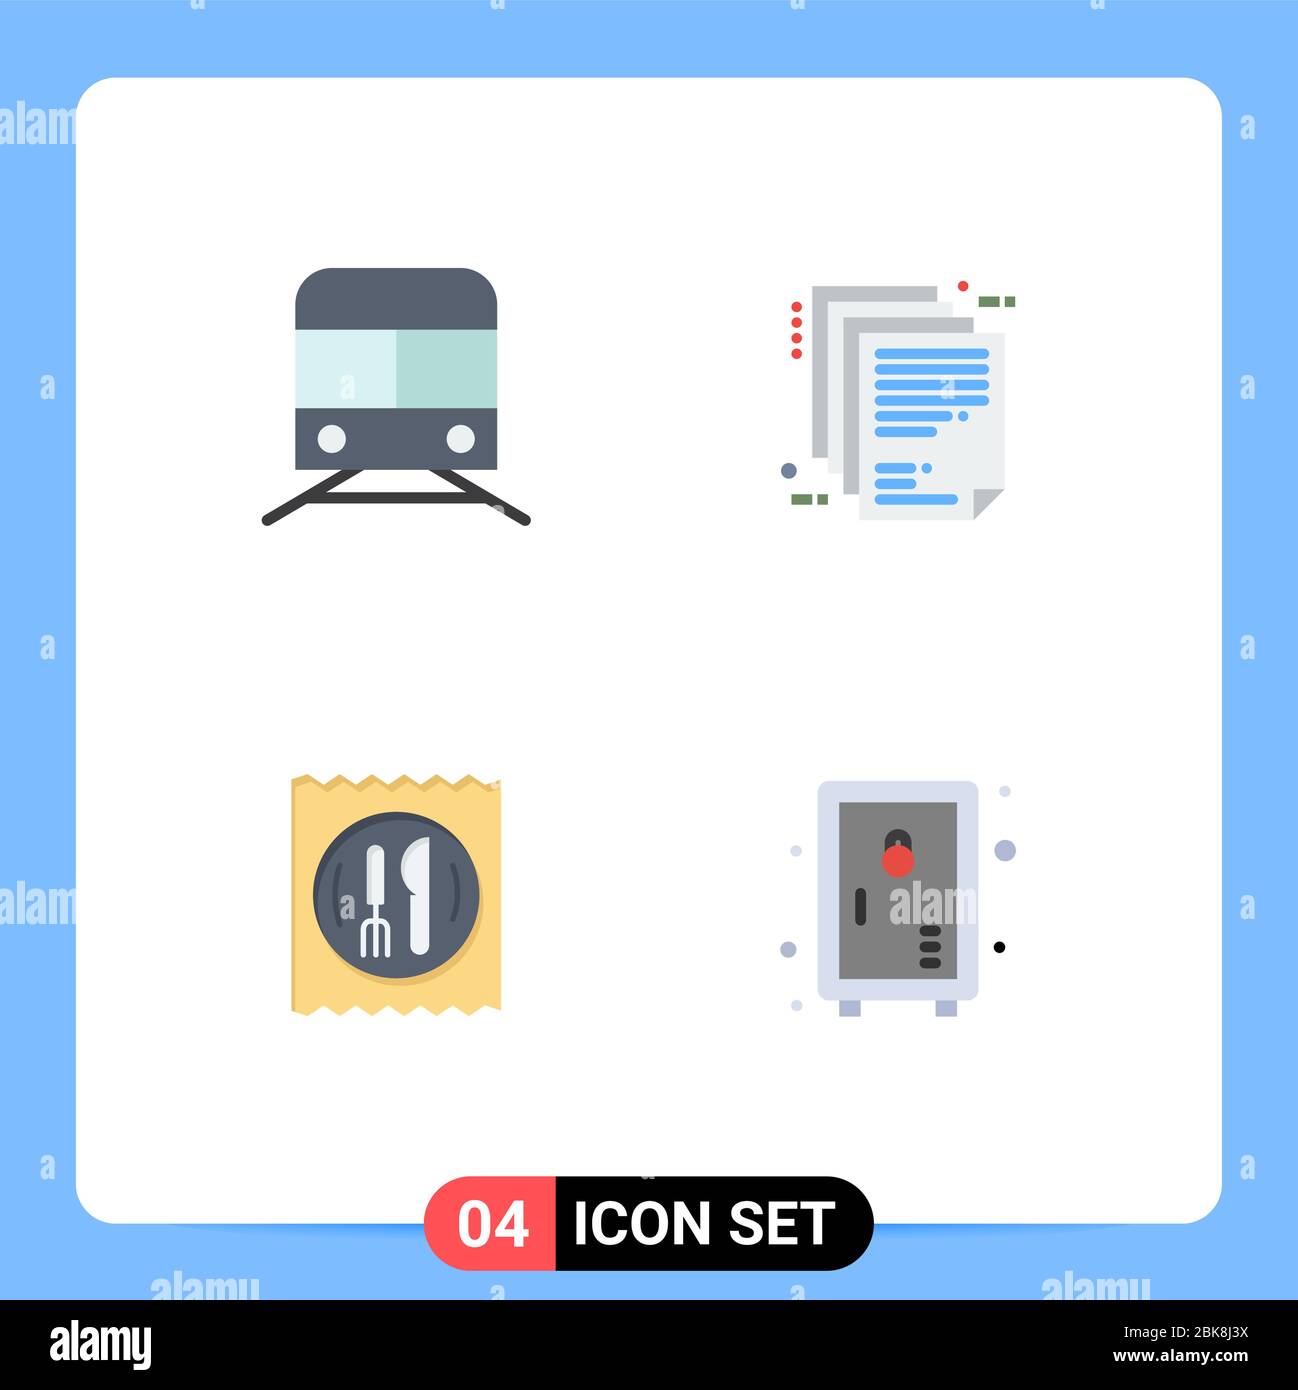 Universal Icon Symbols Group of 4 Modern Flat Icons of metro, paper, transportation, document, hotel Editable Vector Design Elements Stock Vector